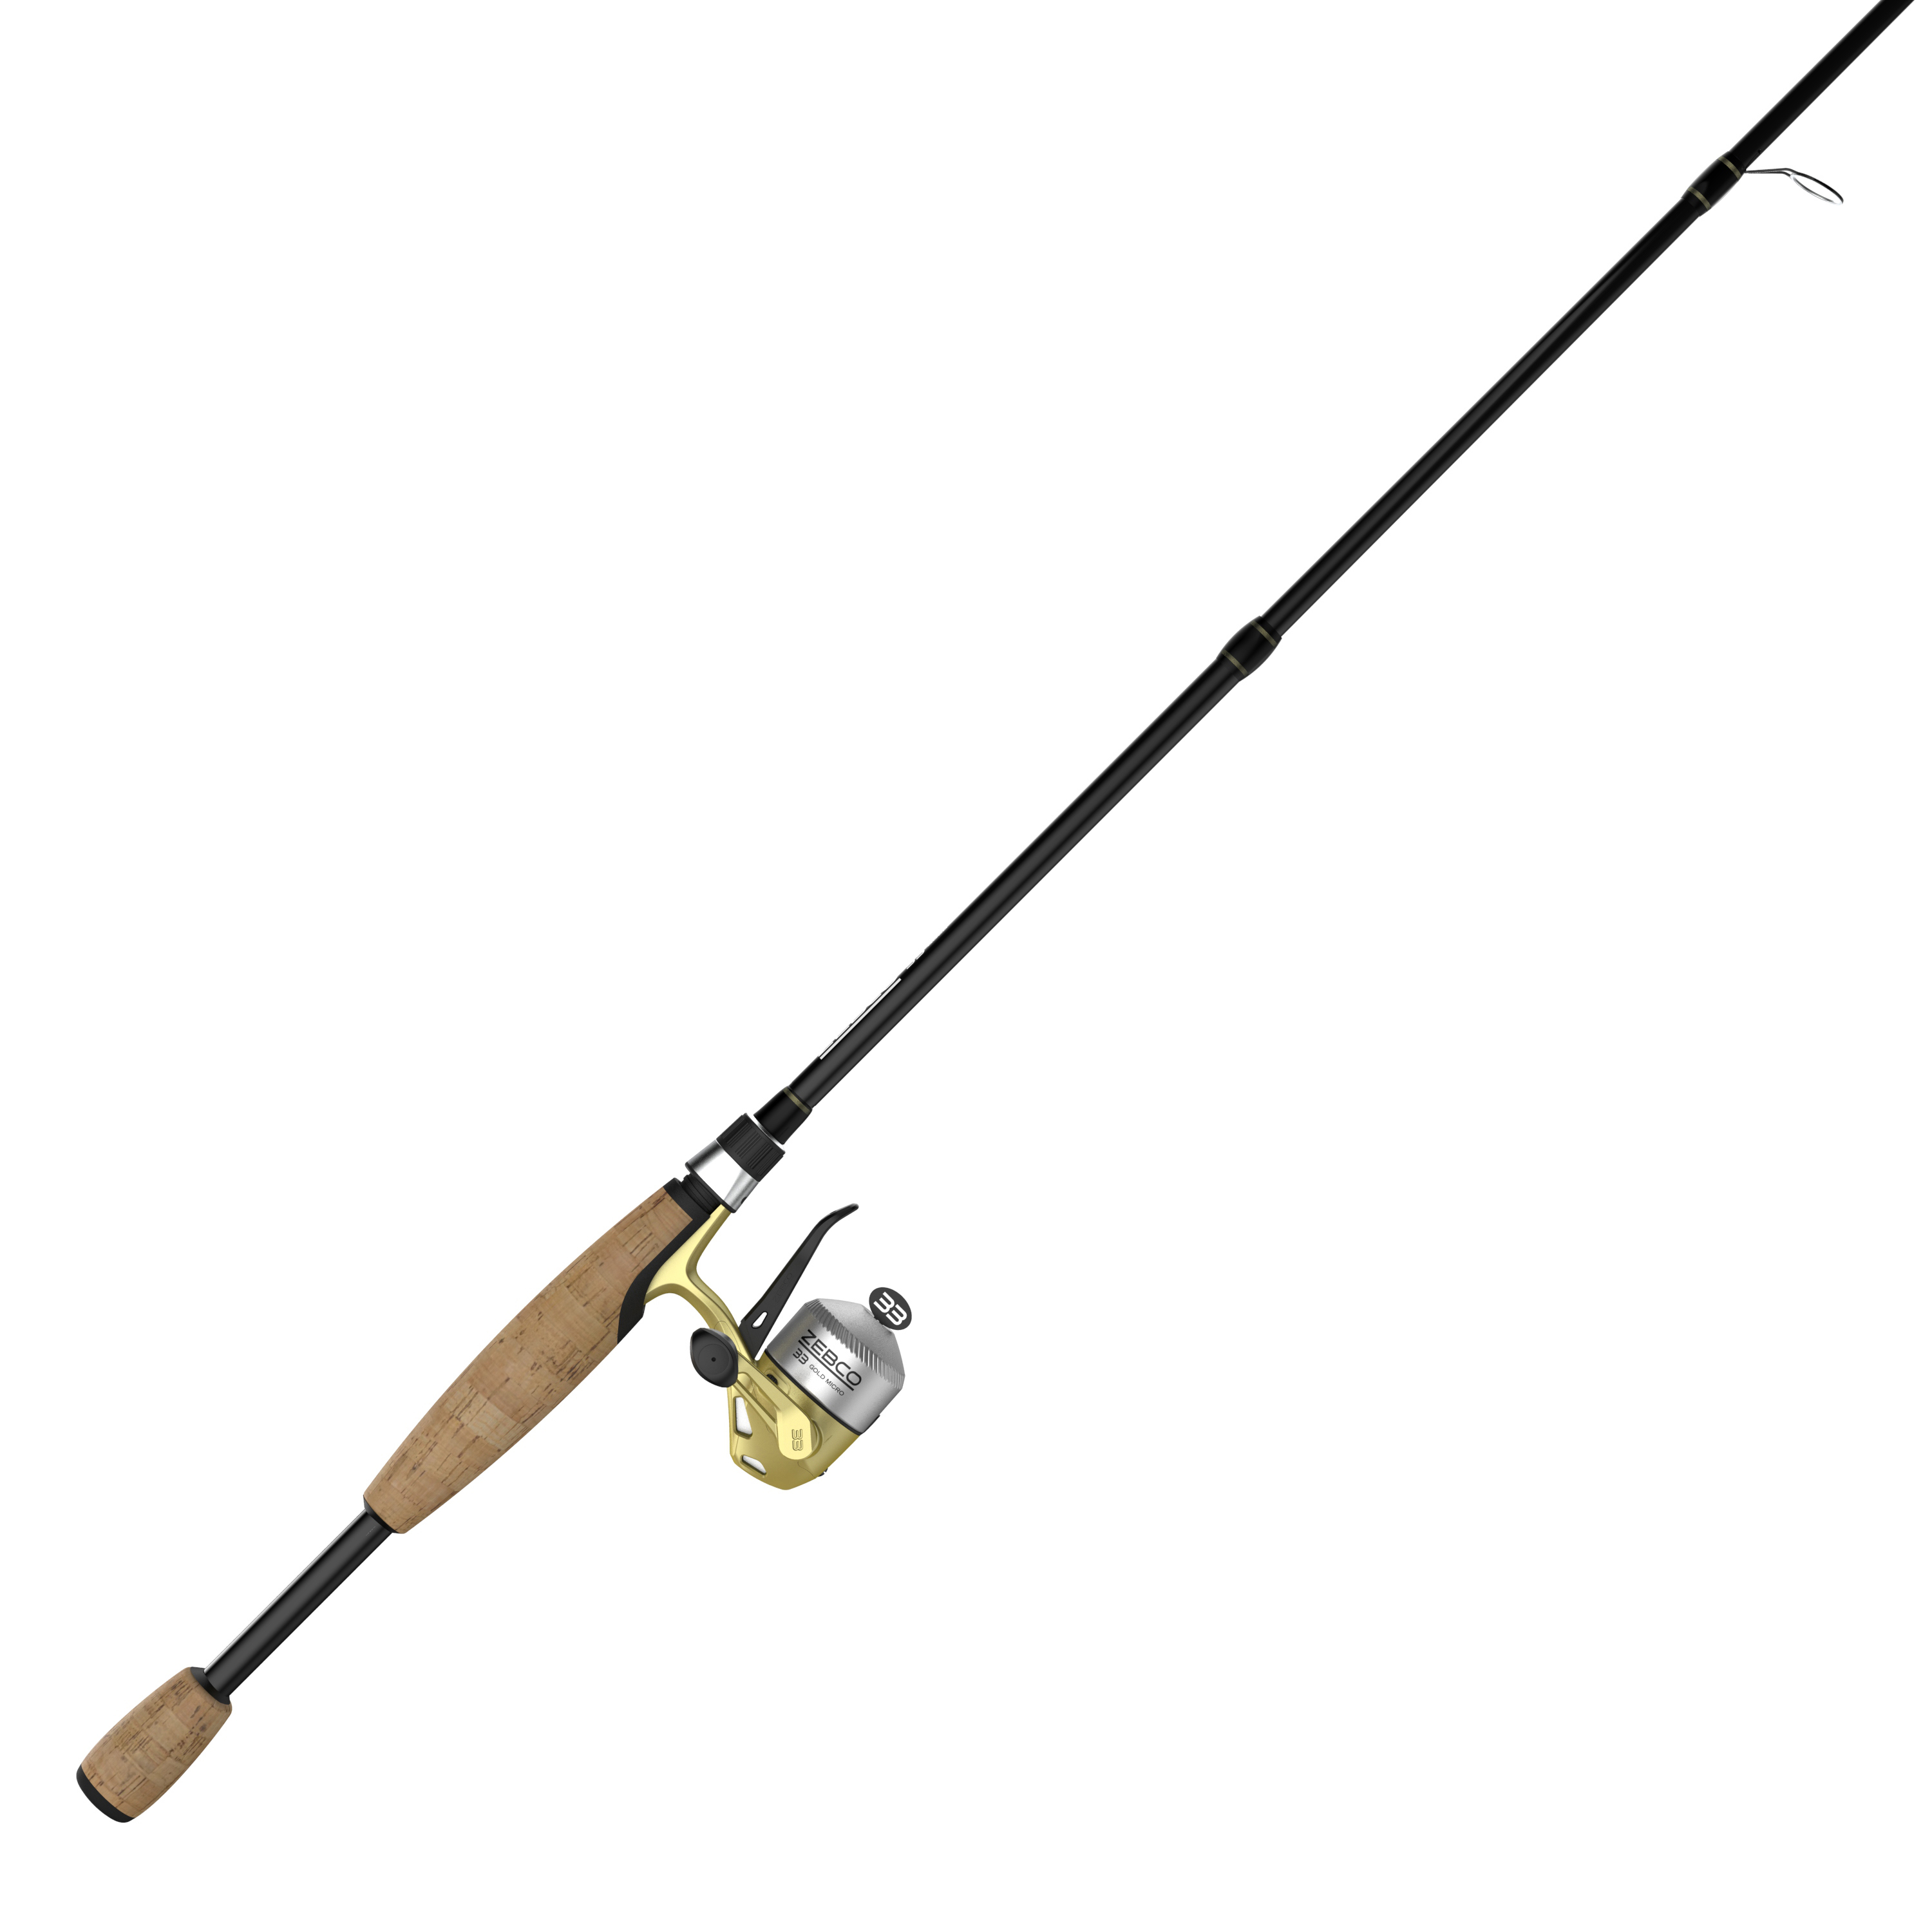  Zebco 33 Micro Ultralite Spincast Package Combo (2-Piece),  4-Feet 5-Inch : Sports & Outdoors